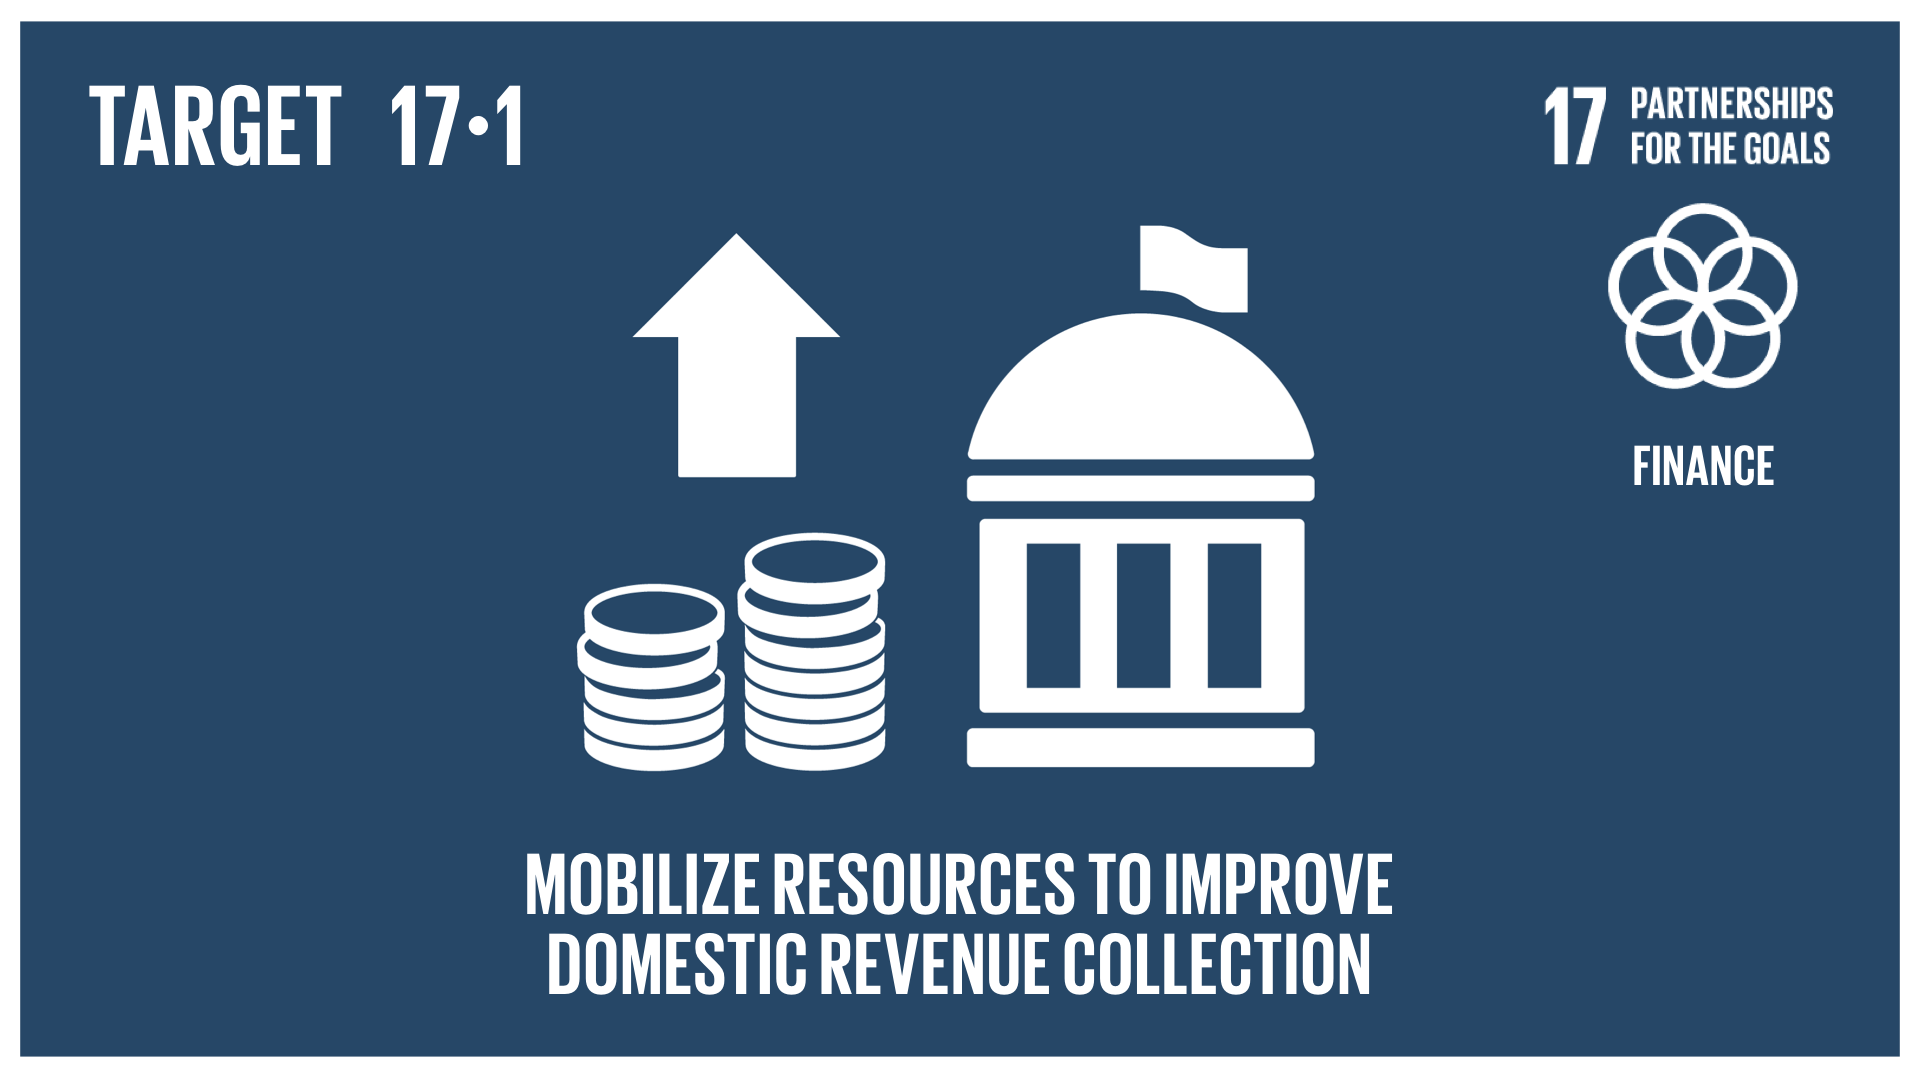 Graphic displaying the mobilisation of resources to improve domestic revenue collection